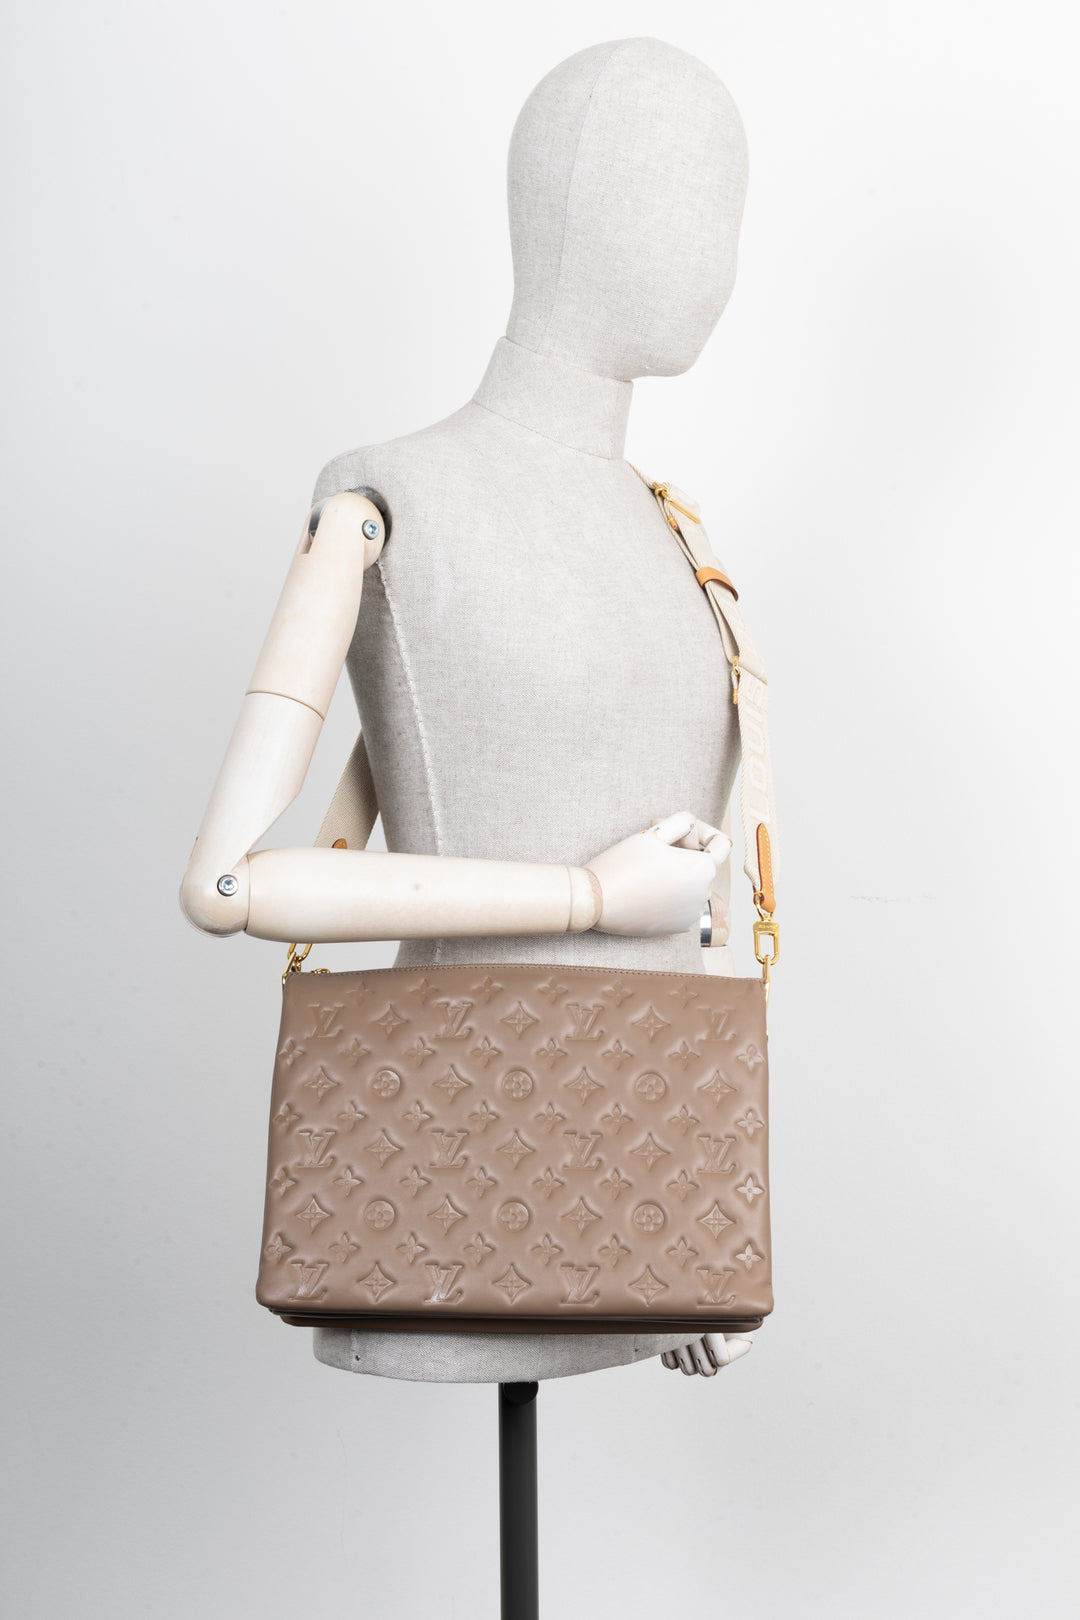 LOUIS VUITTON Coussin MM Bag Taupe